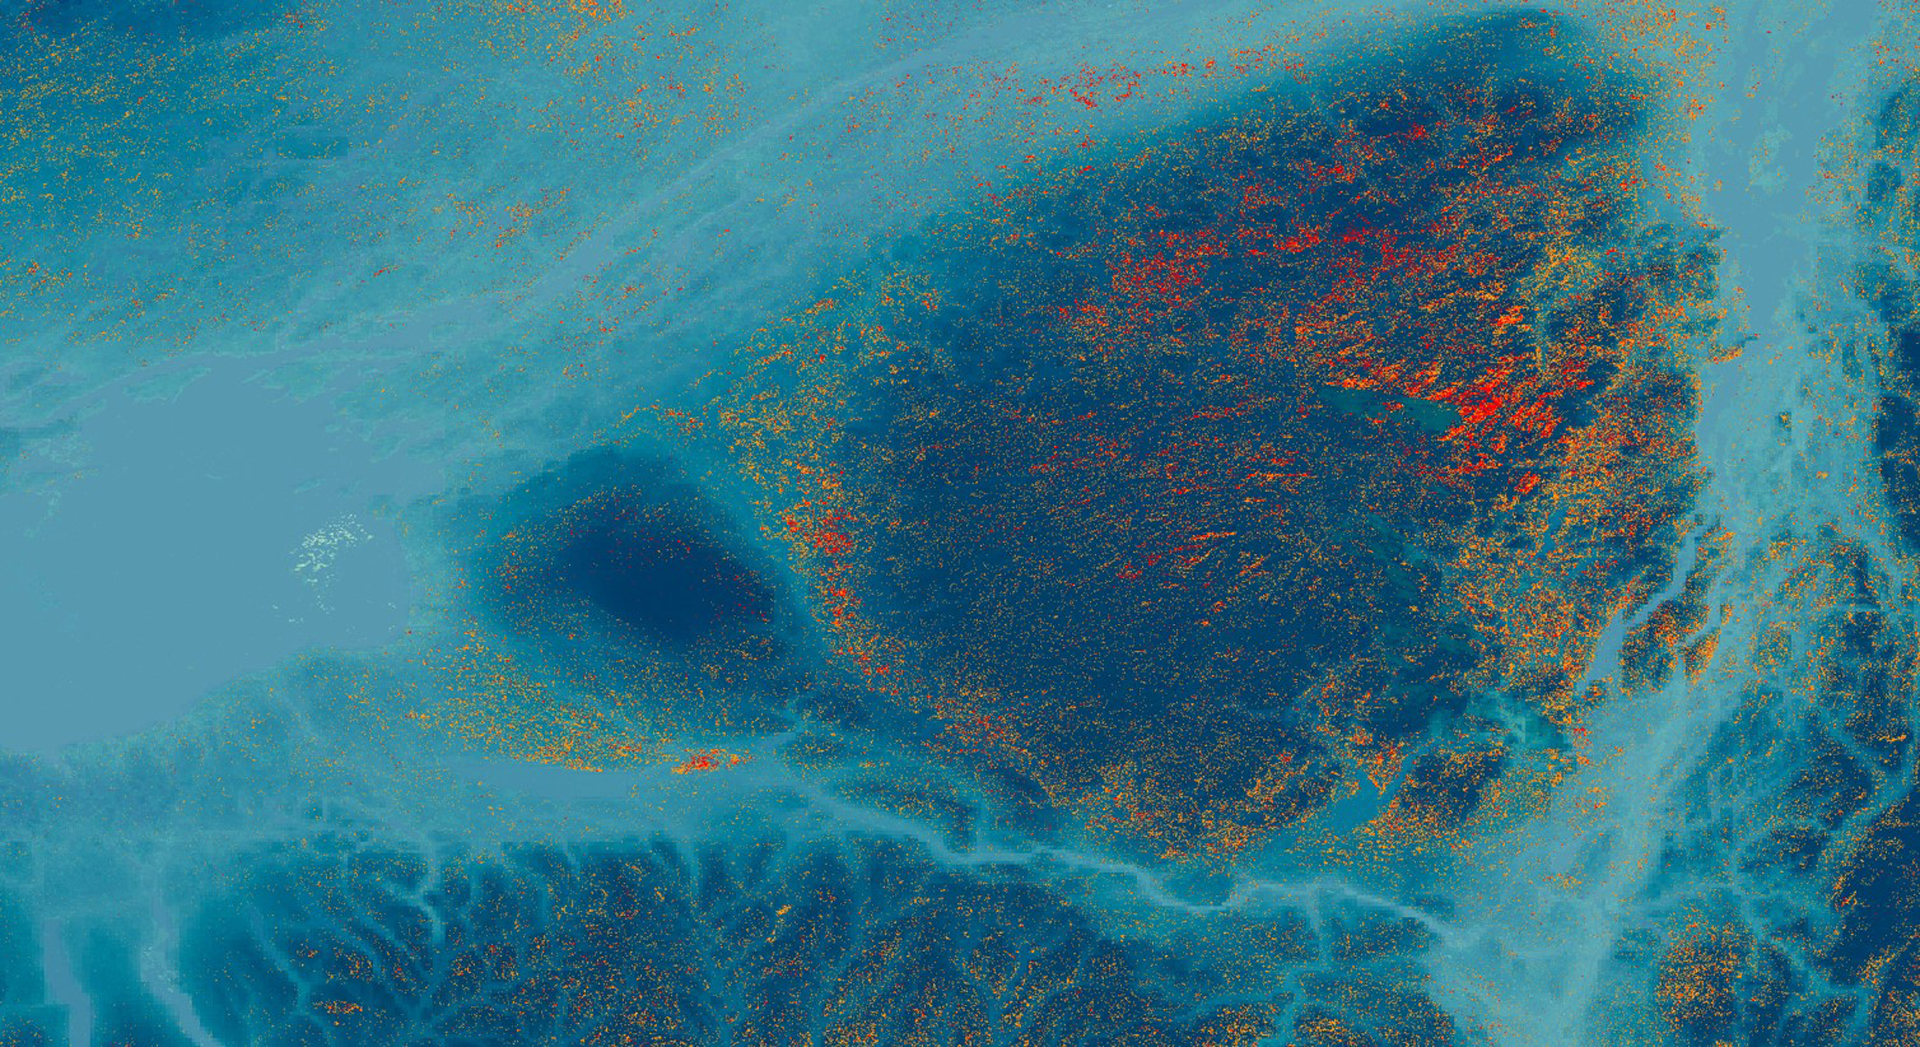 False color composite (bands 5, 4, and 3) of recent (2016 to 2019) leaf-off vegetation in the New York Adirondacks region processed using Landsat 8 OLI data overlaid with the HydroSHEDS Hydrologically Conditioned DEM from the World Wildlife Fund (2000) in cyan. Pure eastern hemlock stands are indicated in red and hemlock-dominant stands are indicated in orange. Areas of pure eastern hemlock should be the primary focus of land managers’ conservation efforts against the invasive hemlock woolly adelgid.